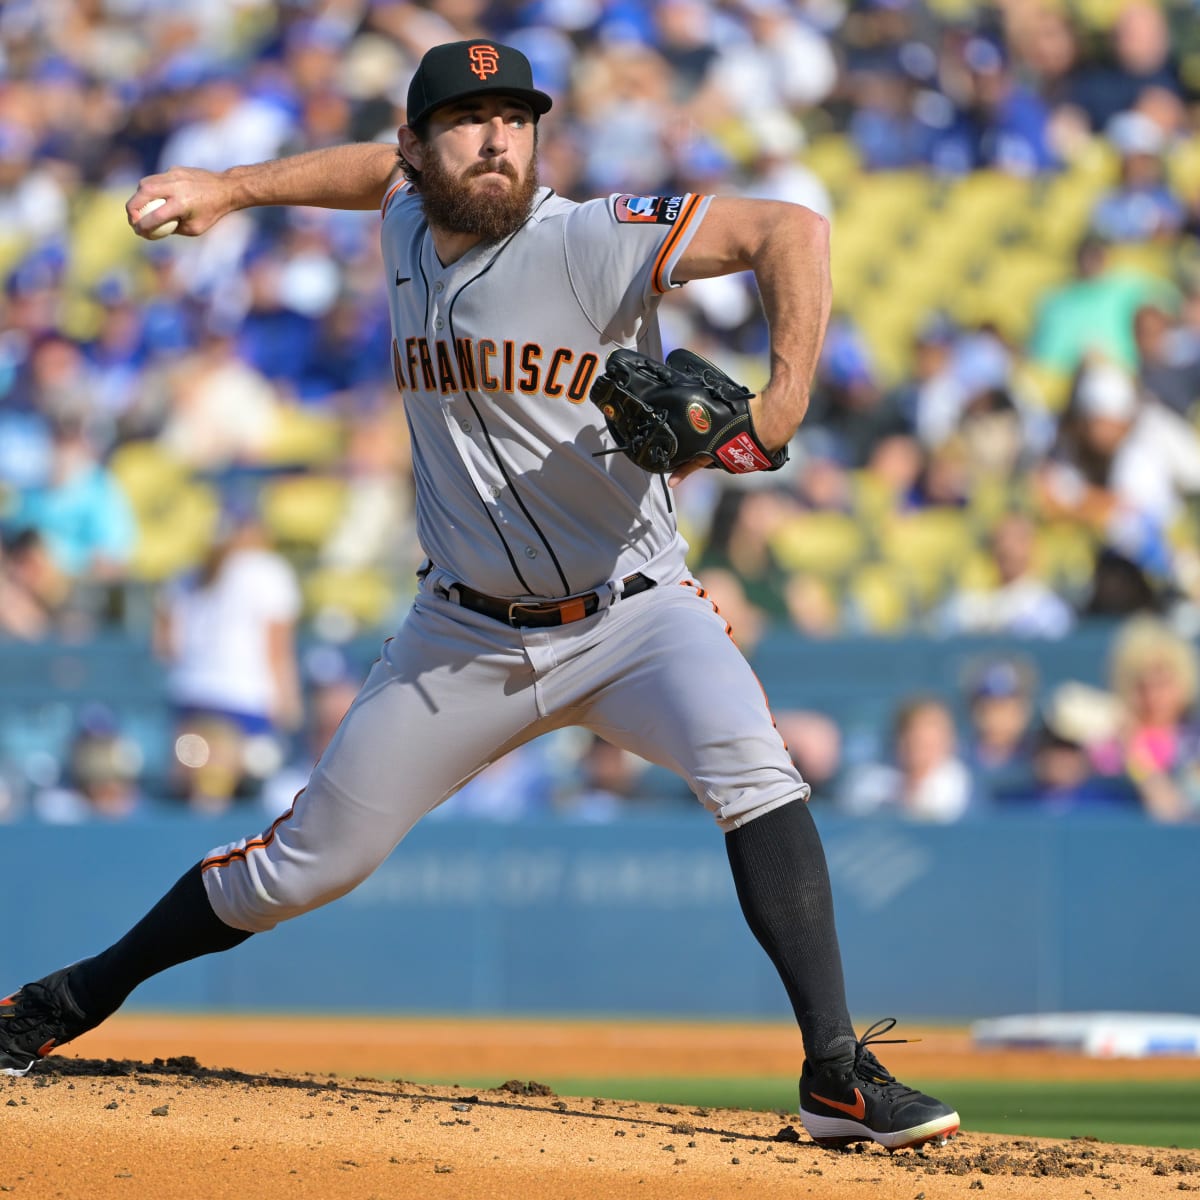 LaMonte Wade's homer isn't enough in SF Giants 3-2 loss to Dodgers